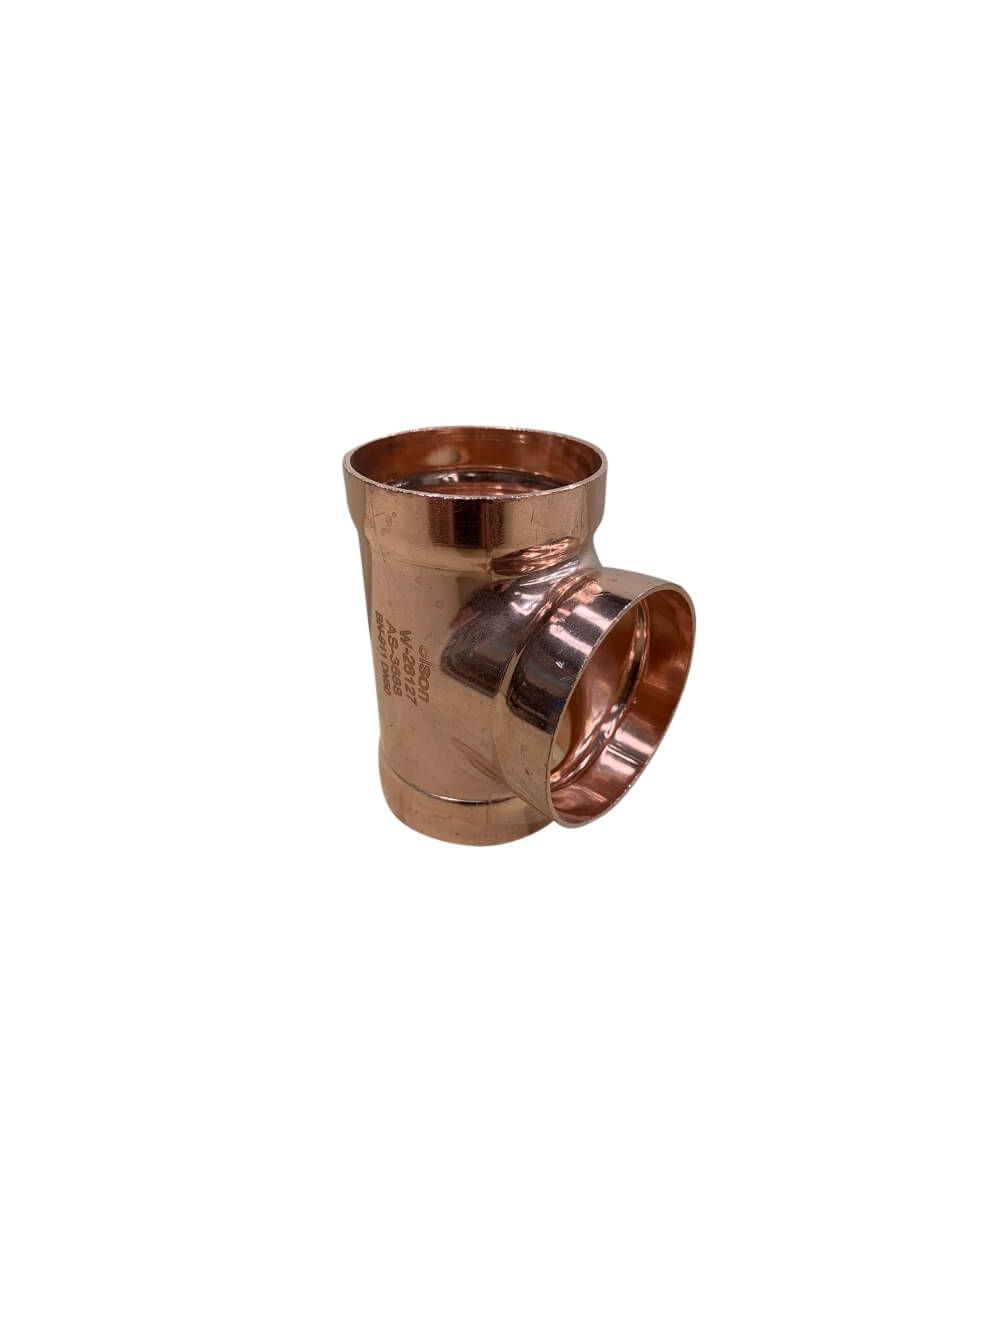 100mm Copper Tee Equal High Pressure Capillary